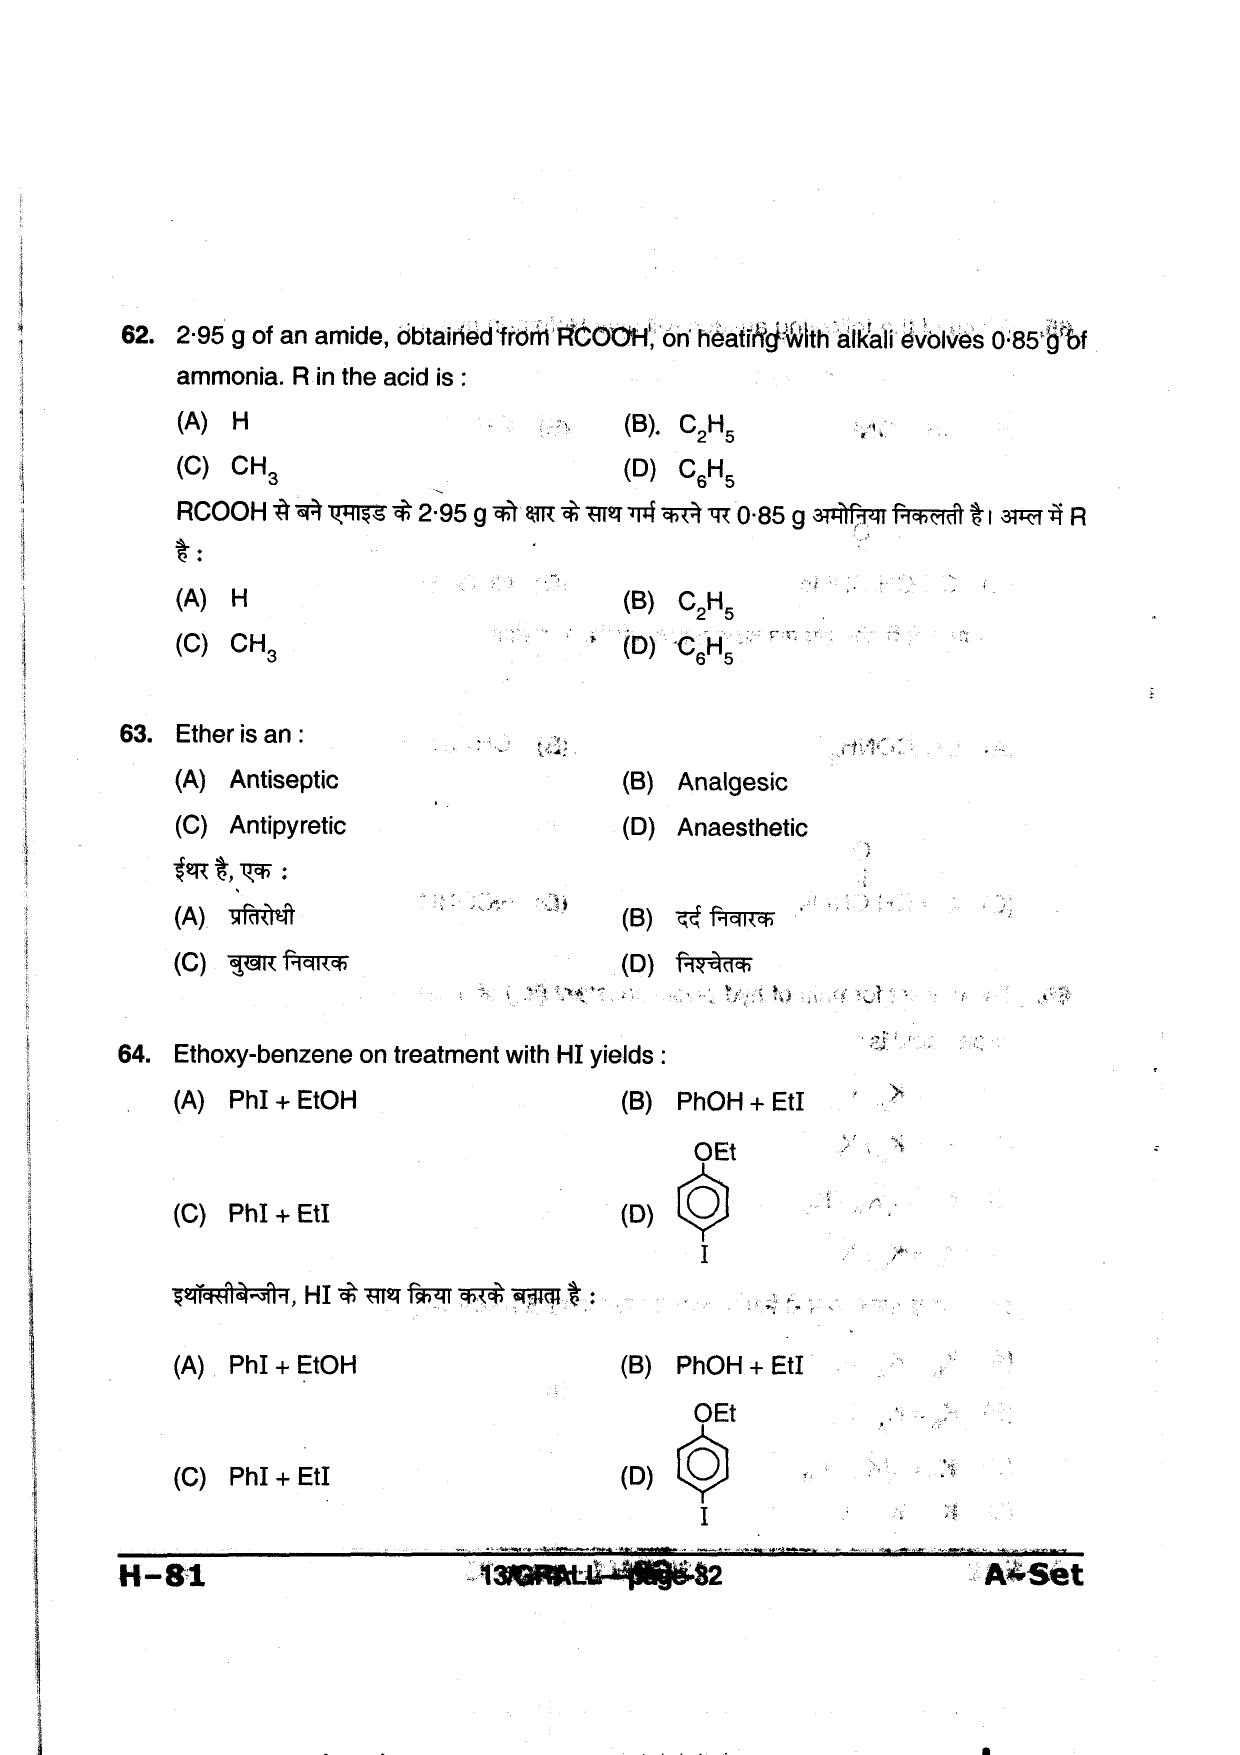 MP PAT 2013 Question Paper - Paper I - Page 32